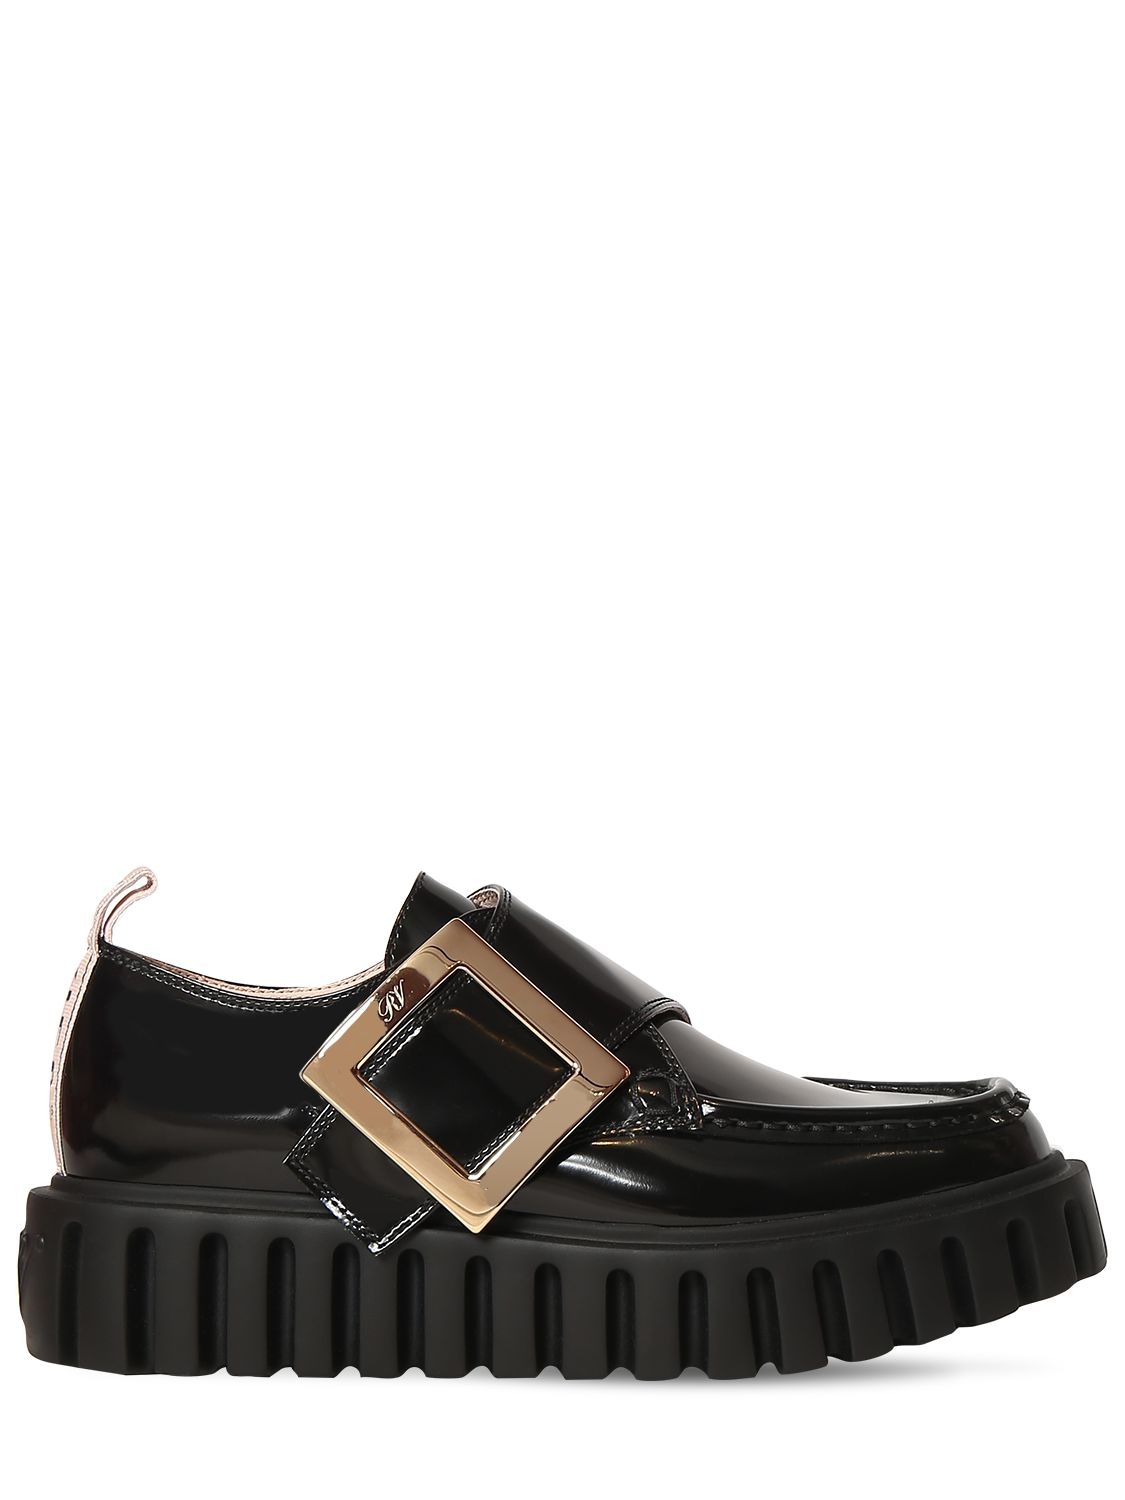 ROGER VIVIER 35MM VIV CREEPERS PATENT LEATHER LOAFERS